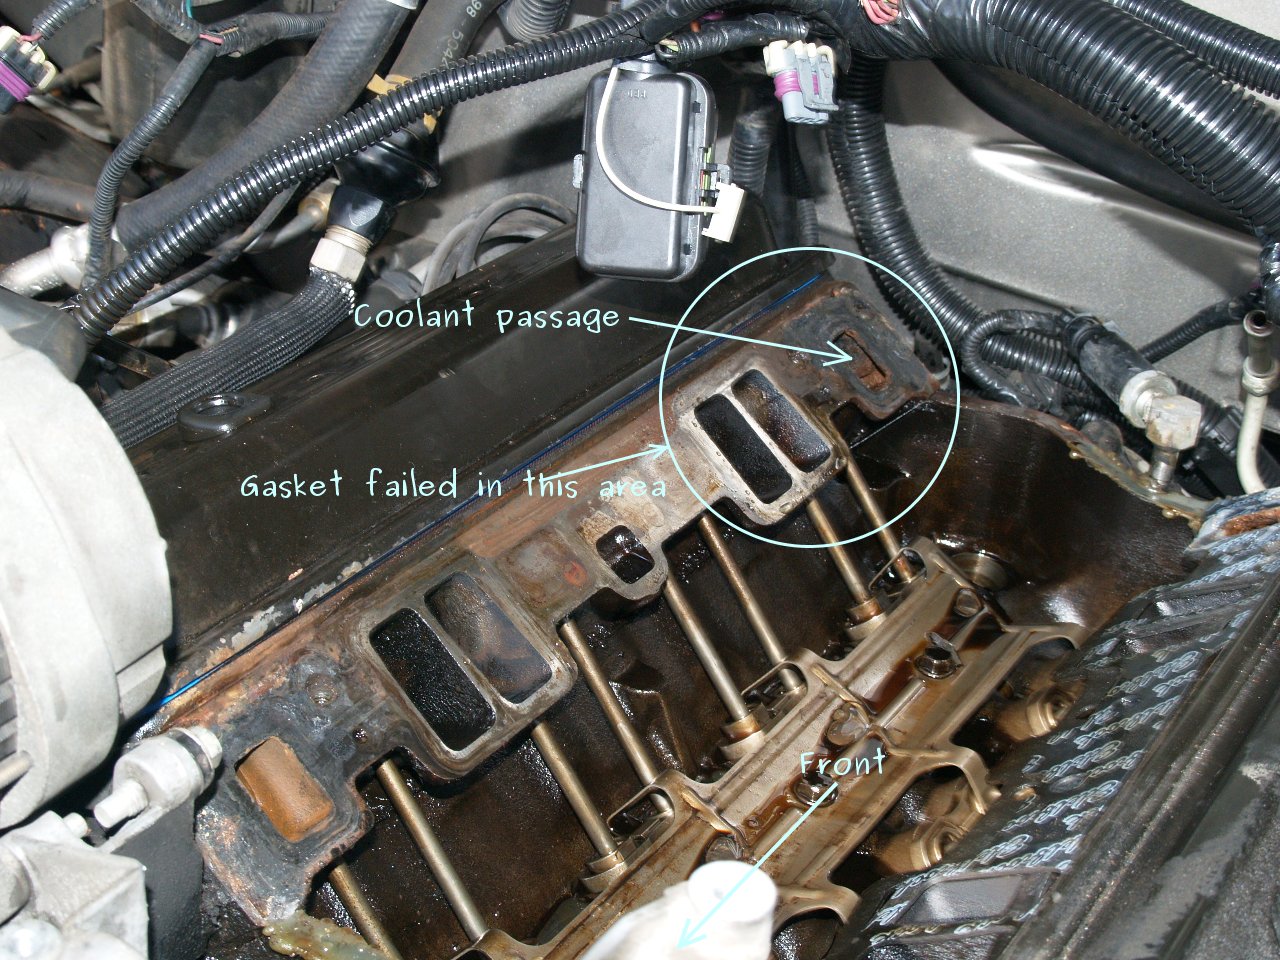 See P0B1A in engine